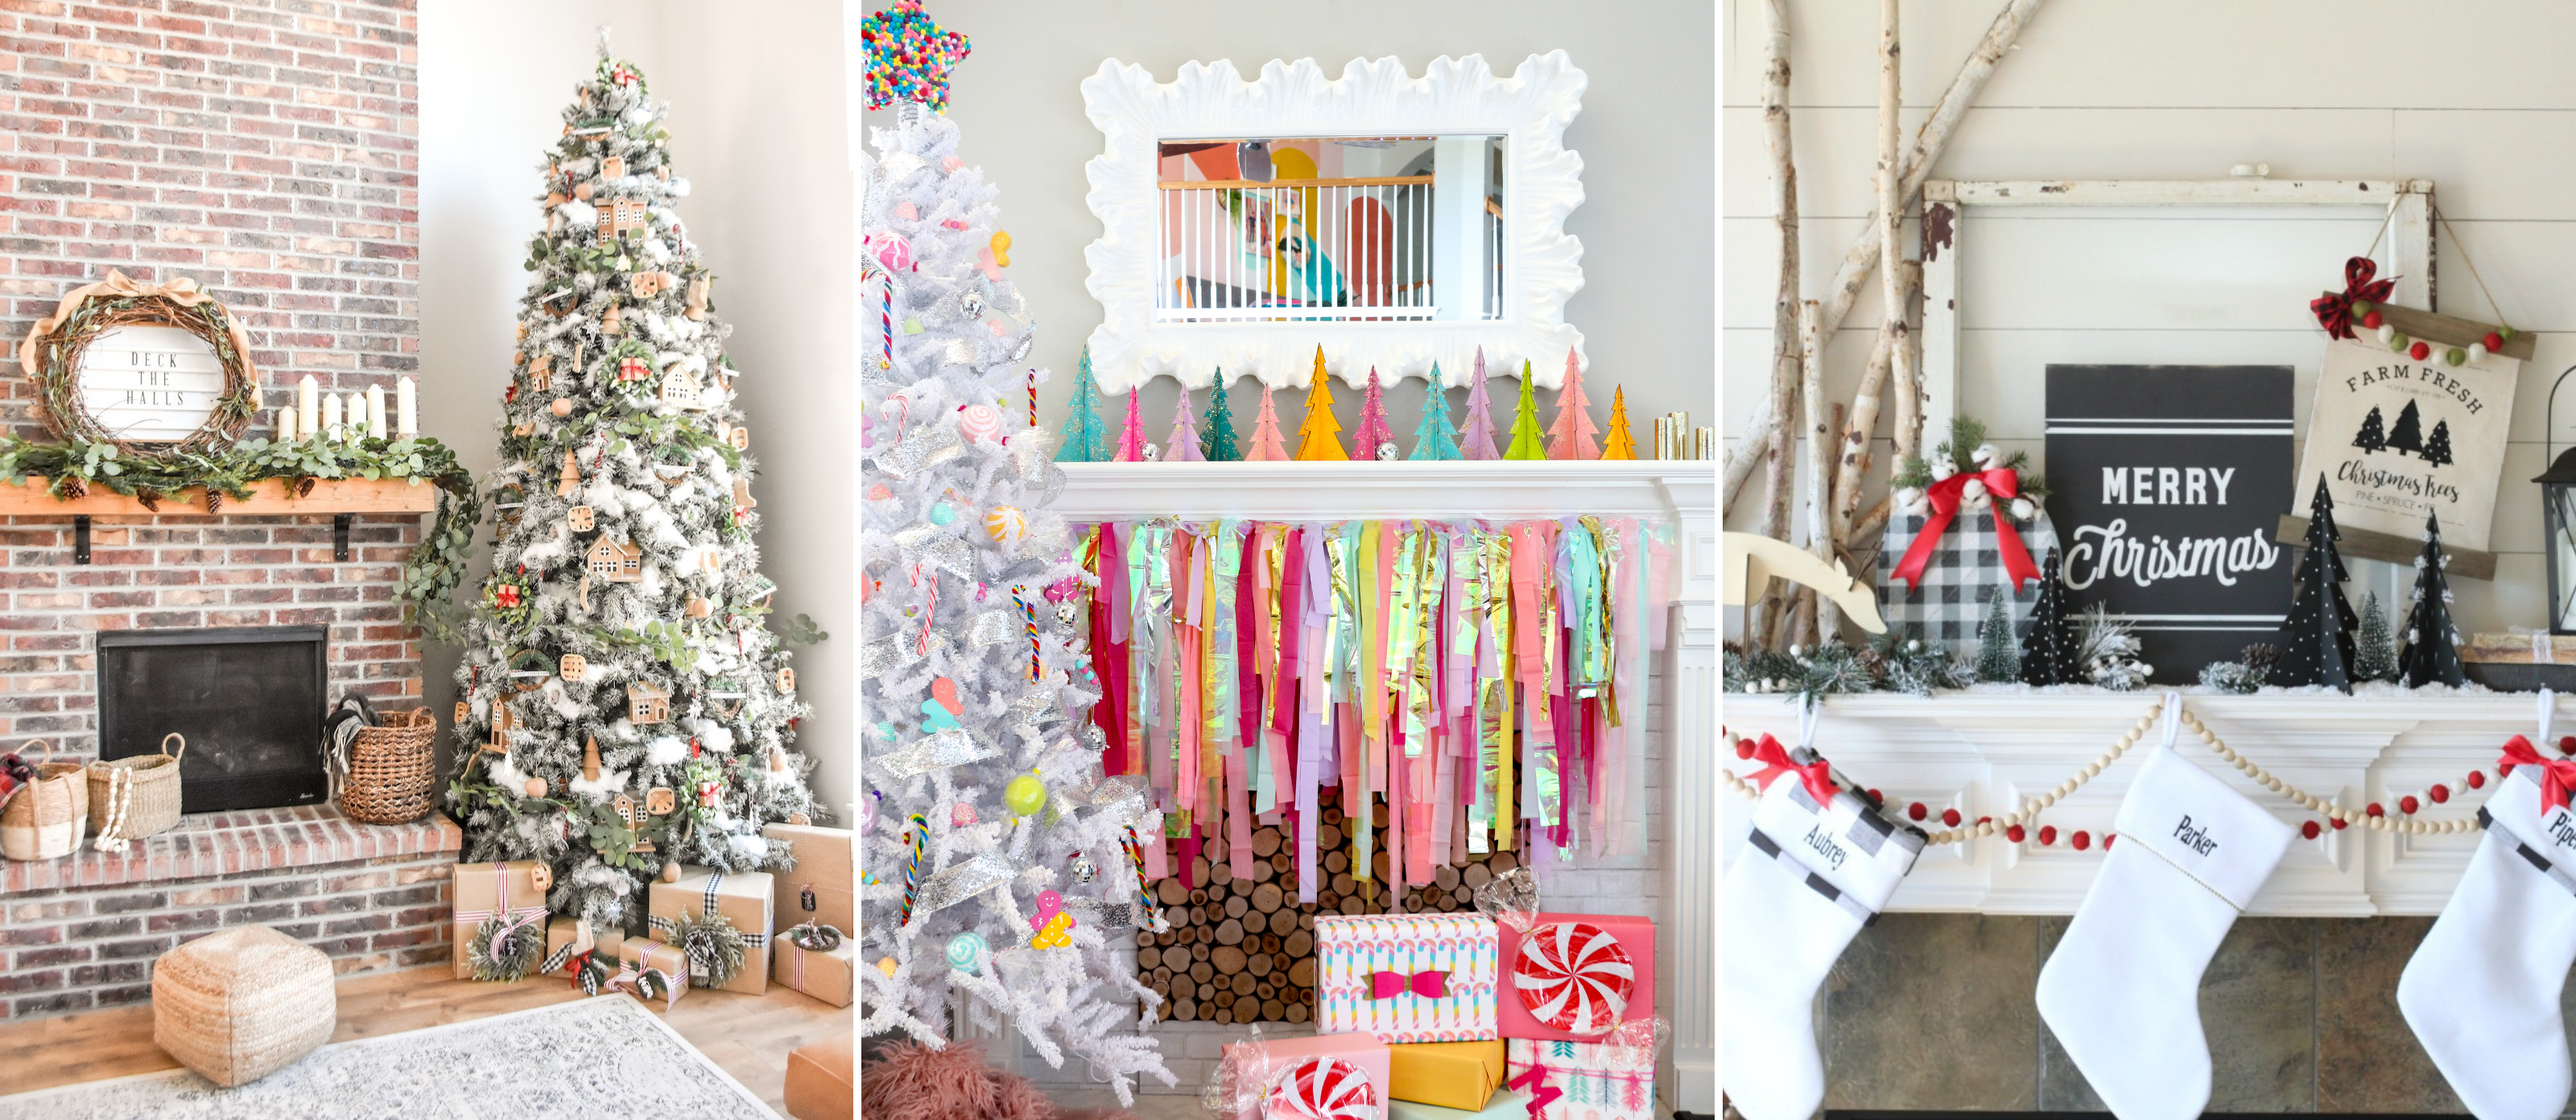 10 Christmas decorations to try this season, from trees to mantels